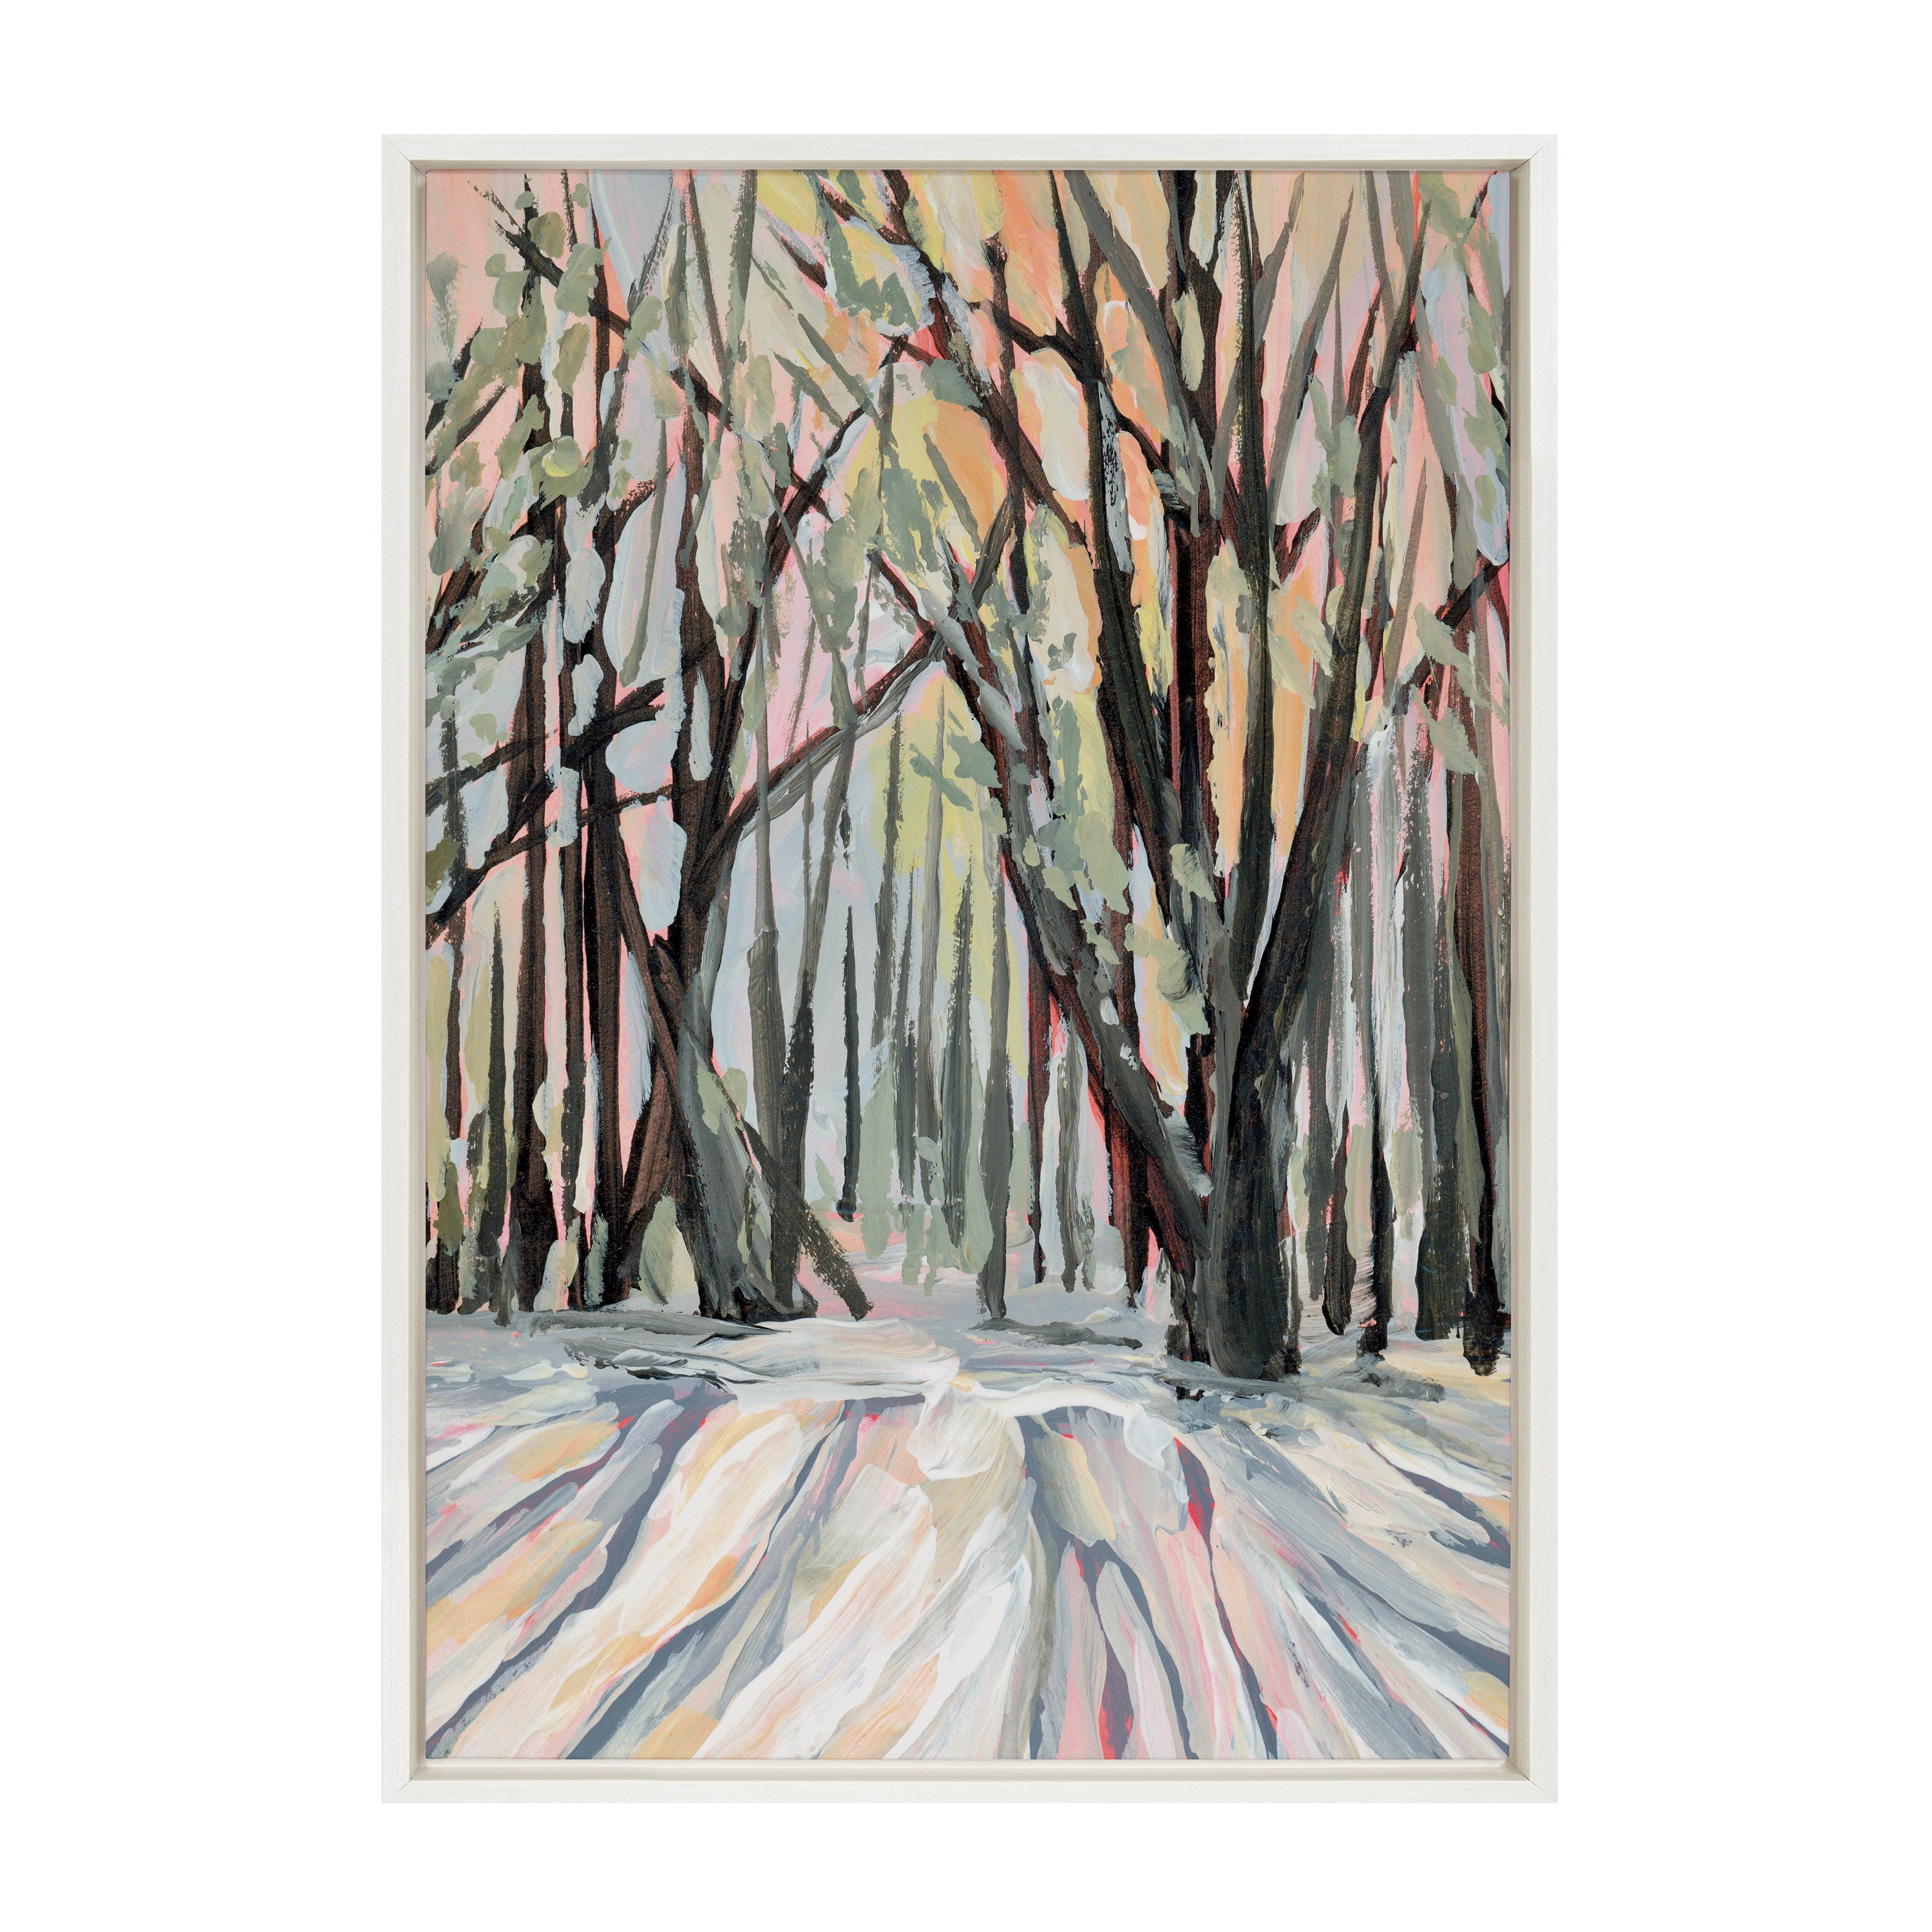 Sylvie Vermont Framed Canvas by Emily Kenney